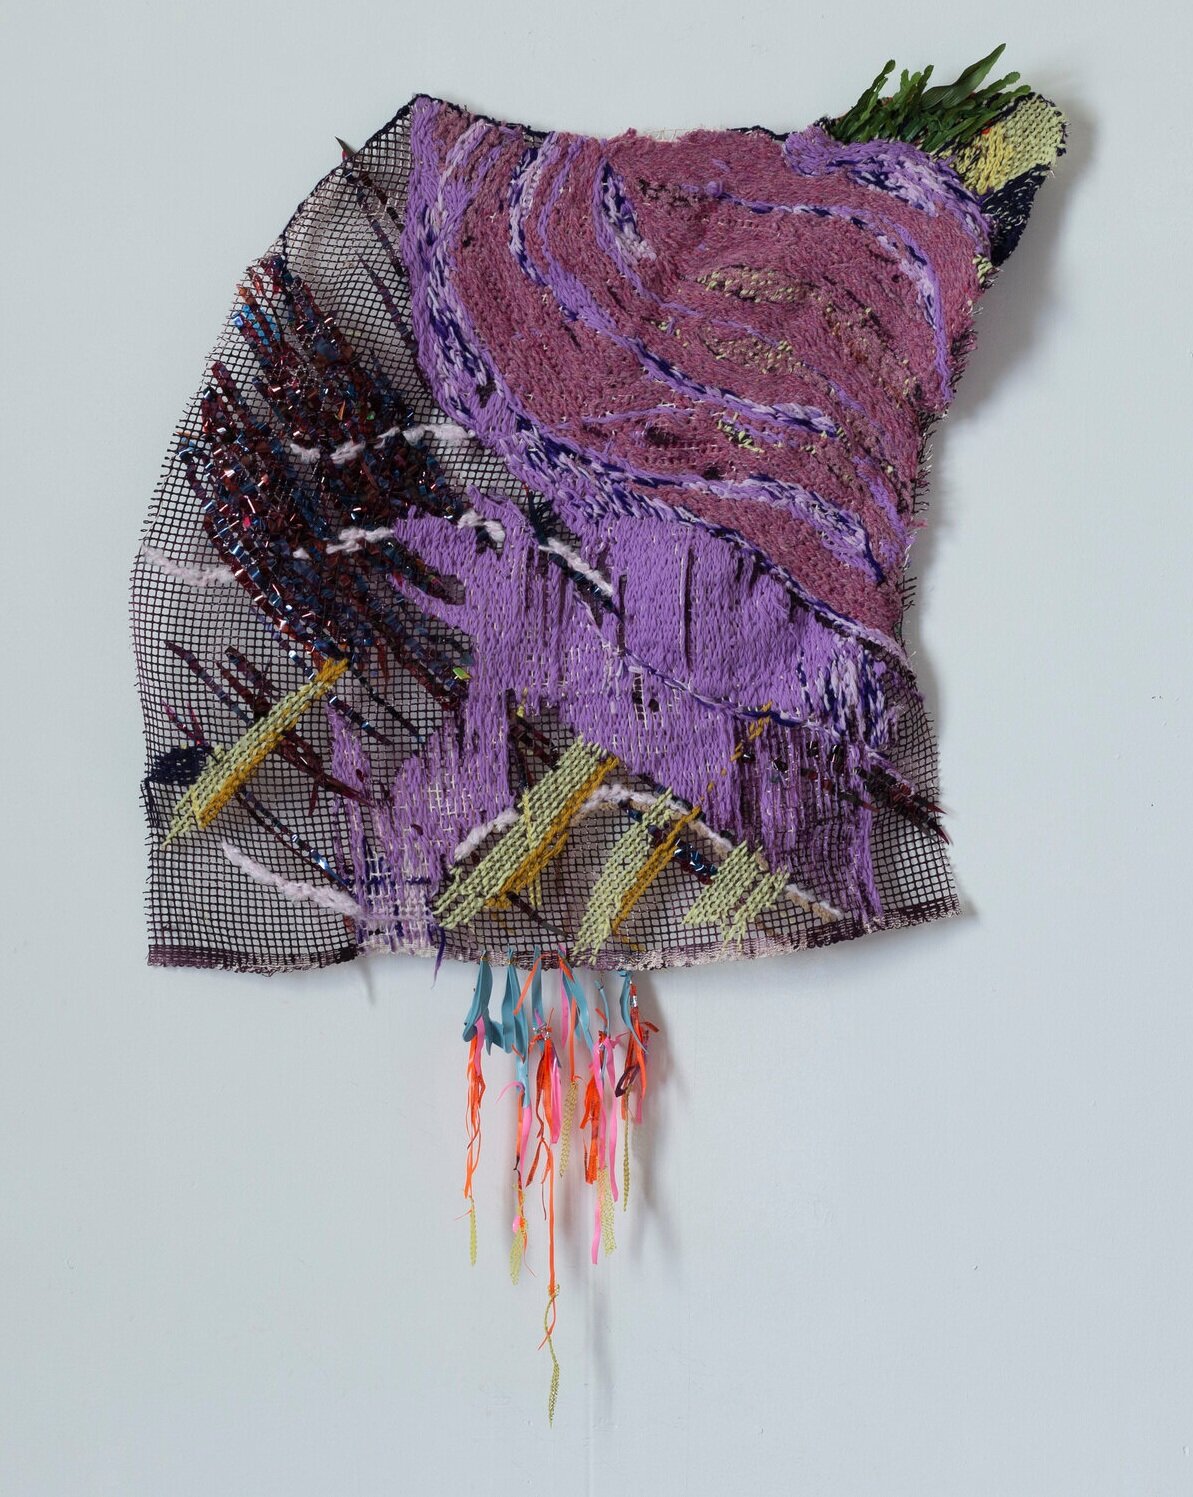   Old fire makes new (purple prosaical) , 2020, yarn, plastics, cut-up transparency paper paintings on latch hook canvas, approximately 18 x 22 inches 